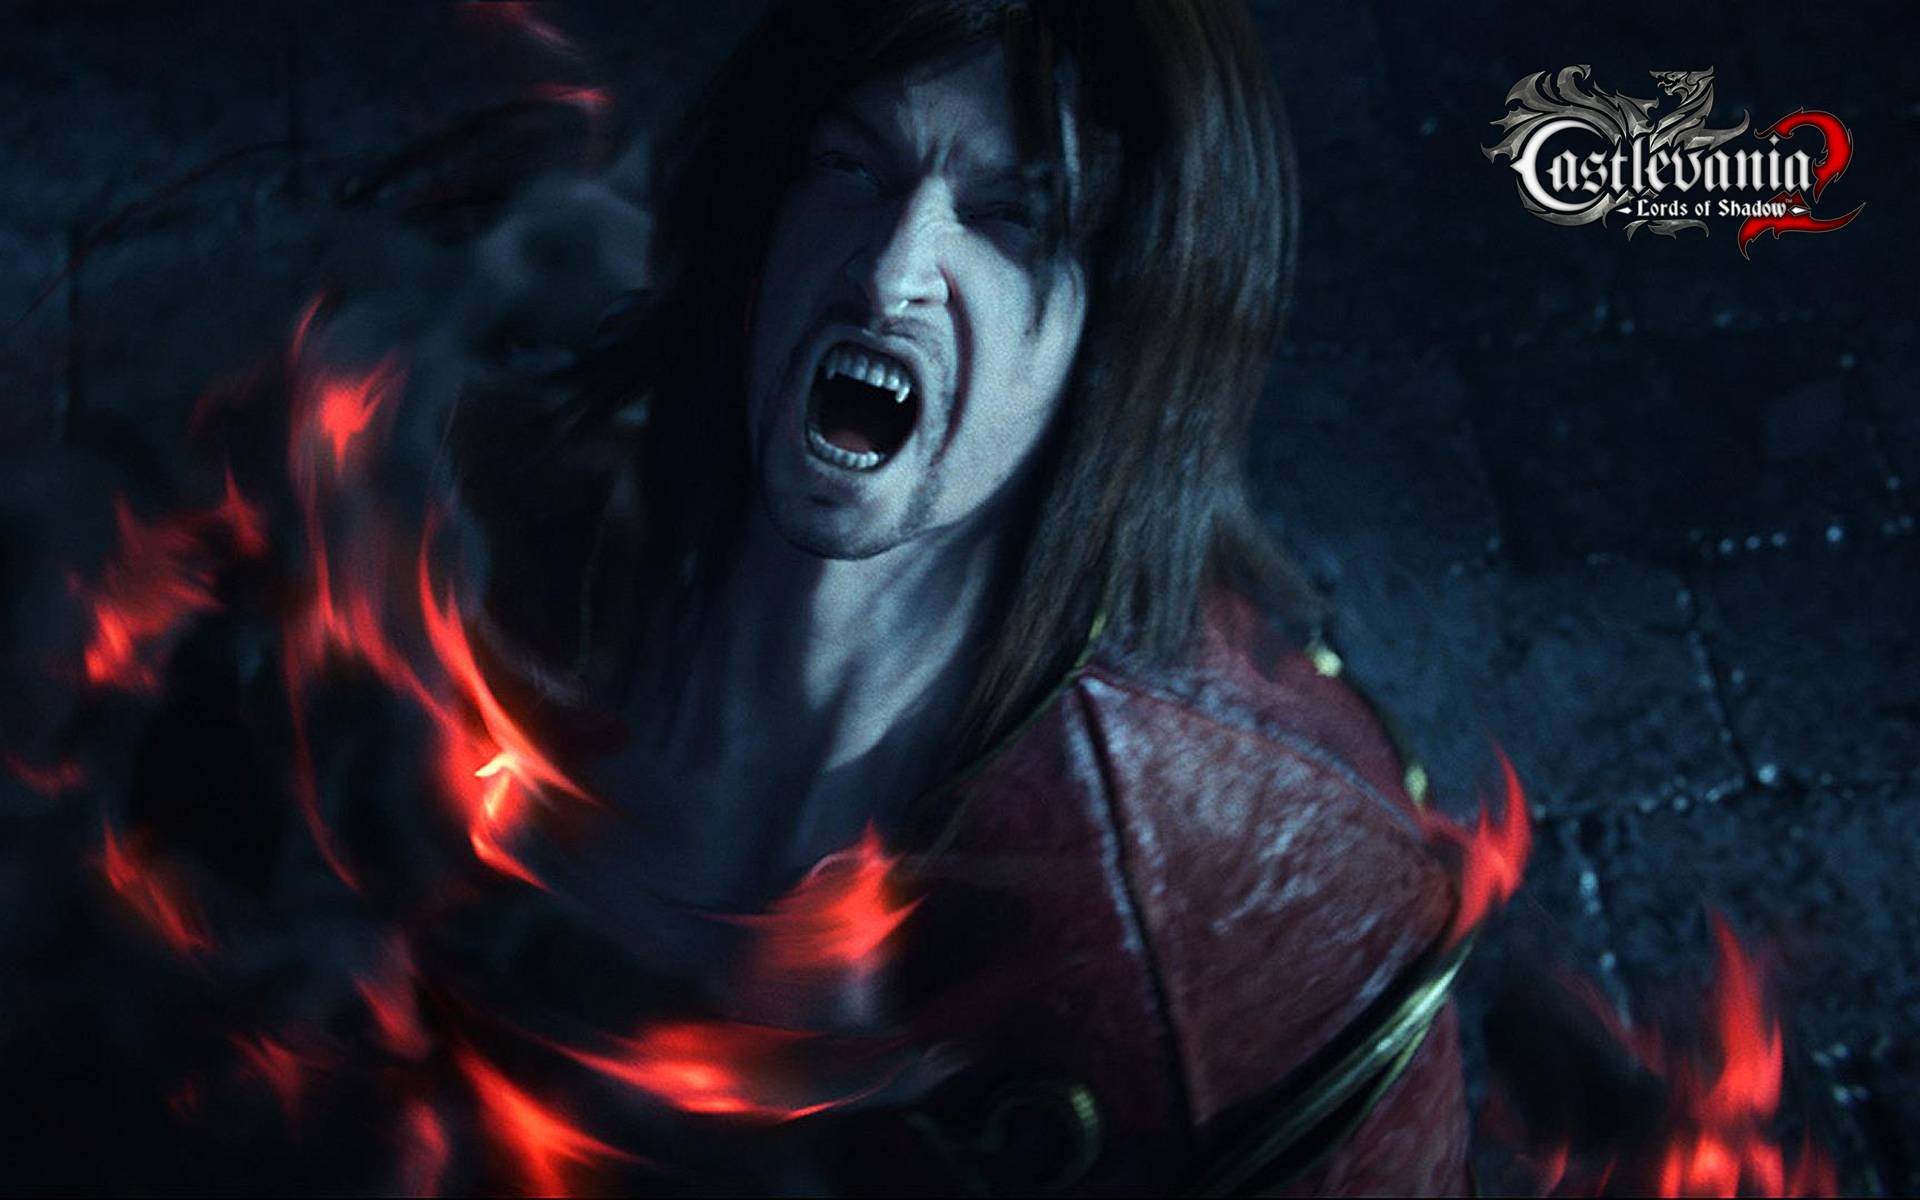 Castlevania lords of shadow wallpapers in hd